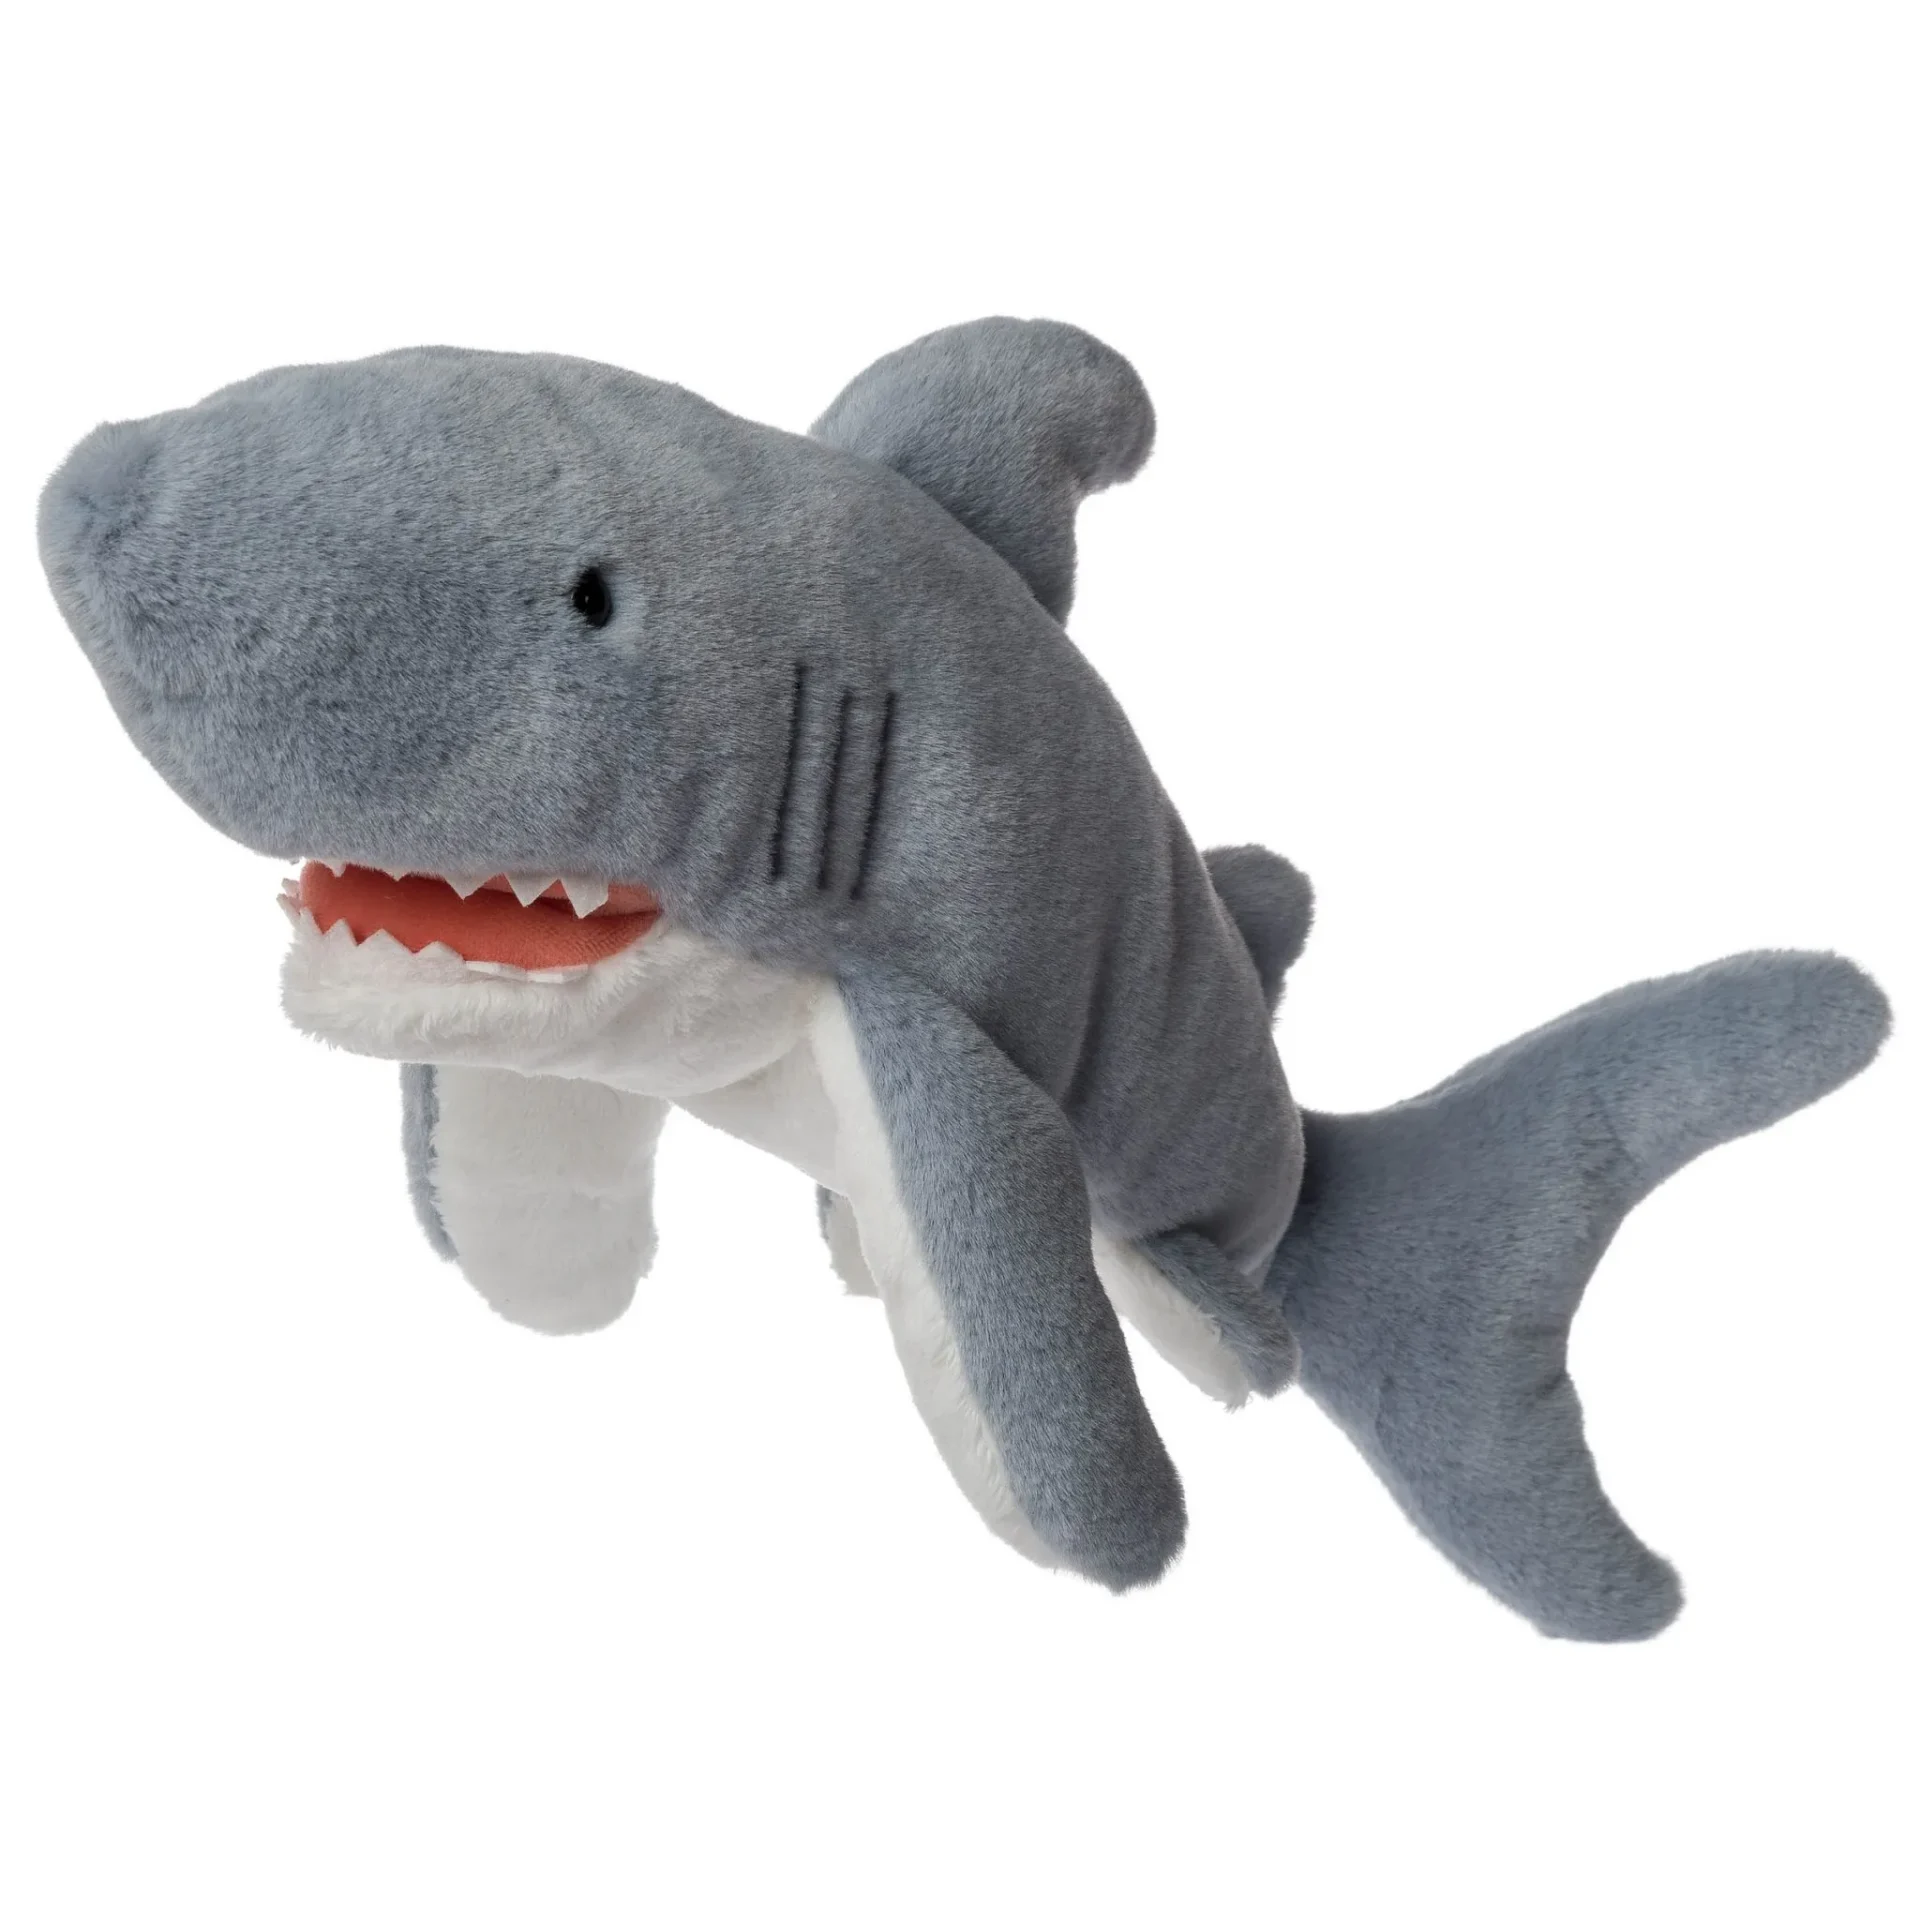 Soft shark toy for children and babies